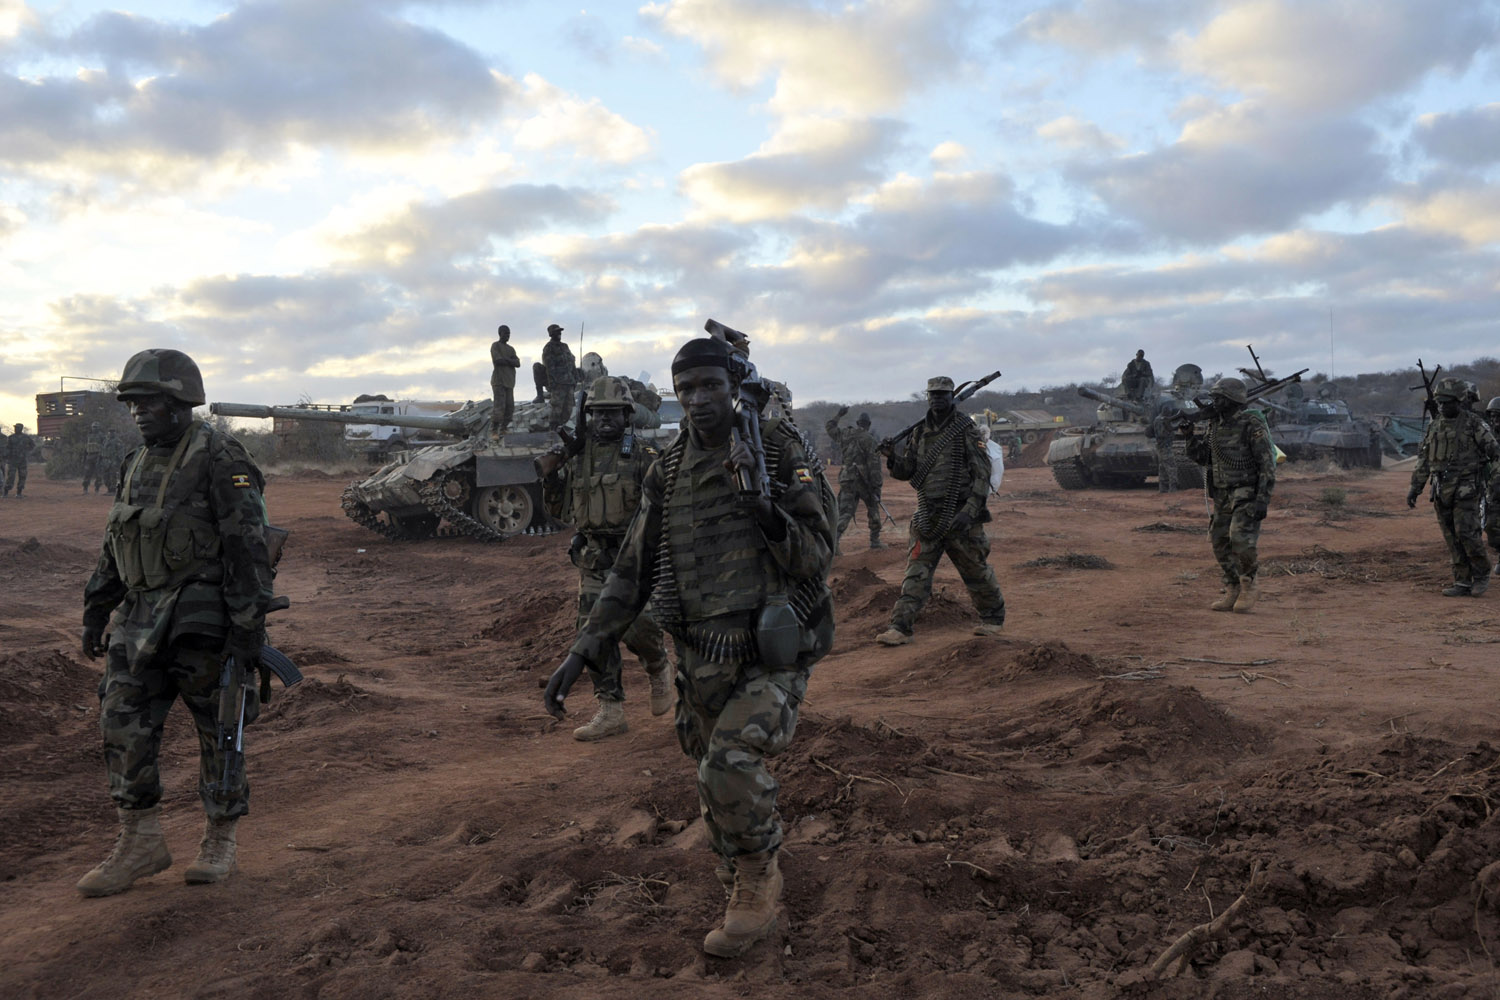 Feb. 23, 2013. Ugandan soldiers, operating under the African Union Mission in Somalia (AMISOM), advance towards Burhkaba from their former position in the town of Leego, Somalia alongside members of the Somali National Army (SNA).